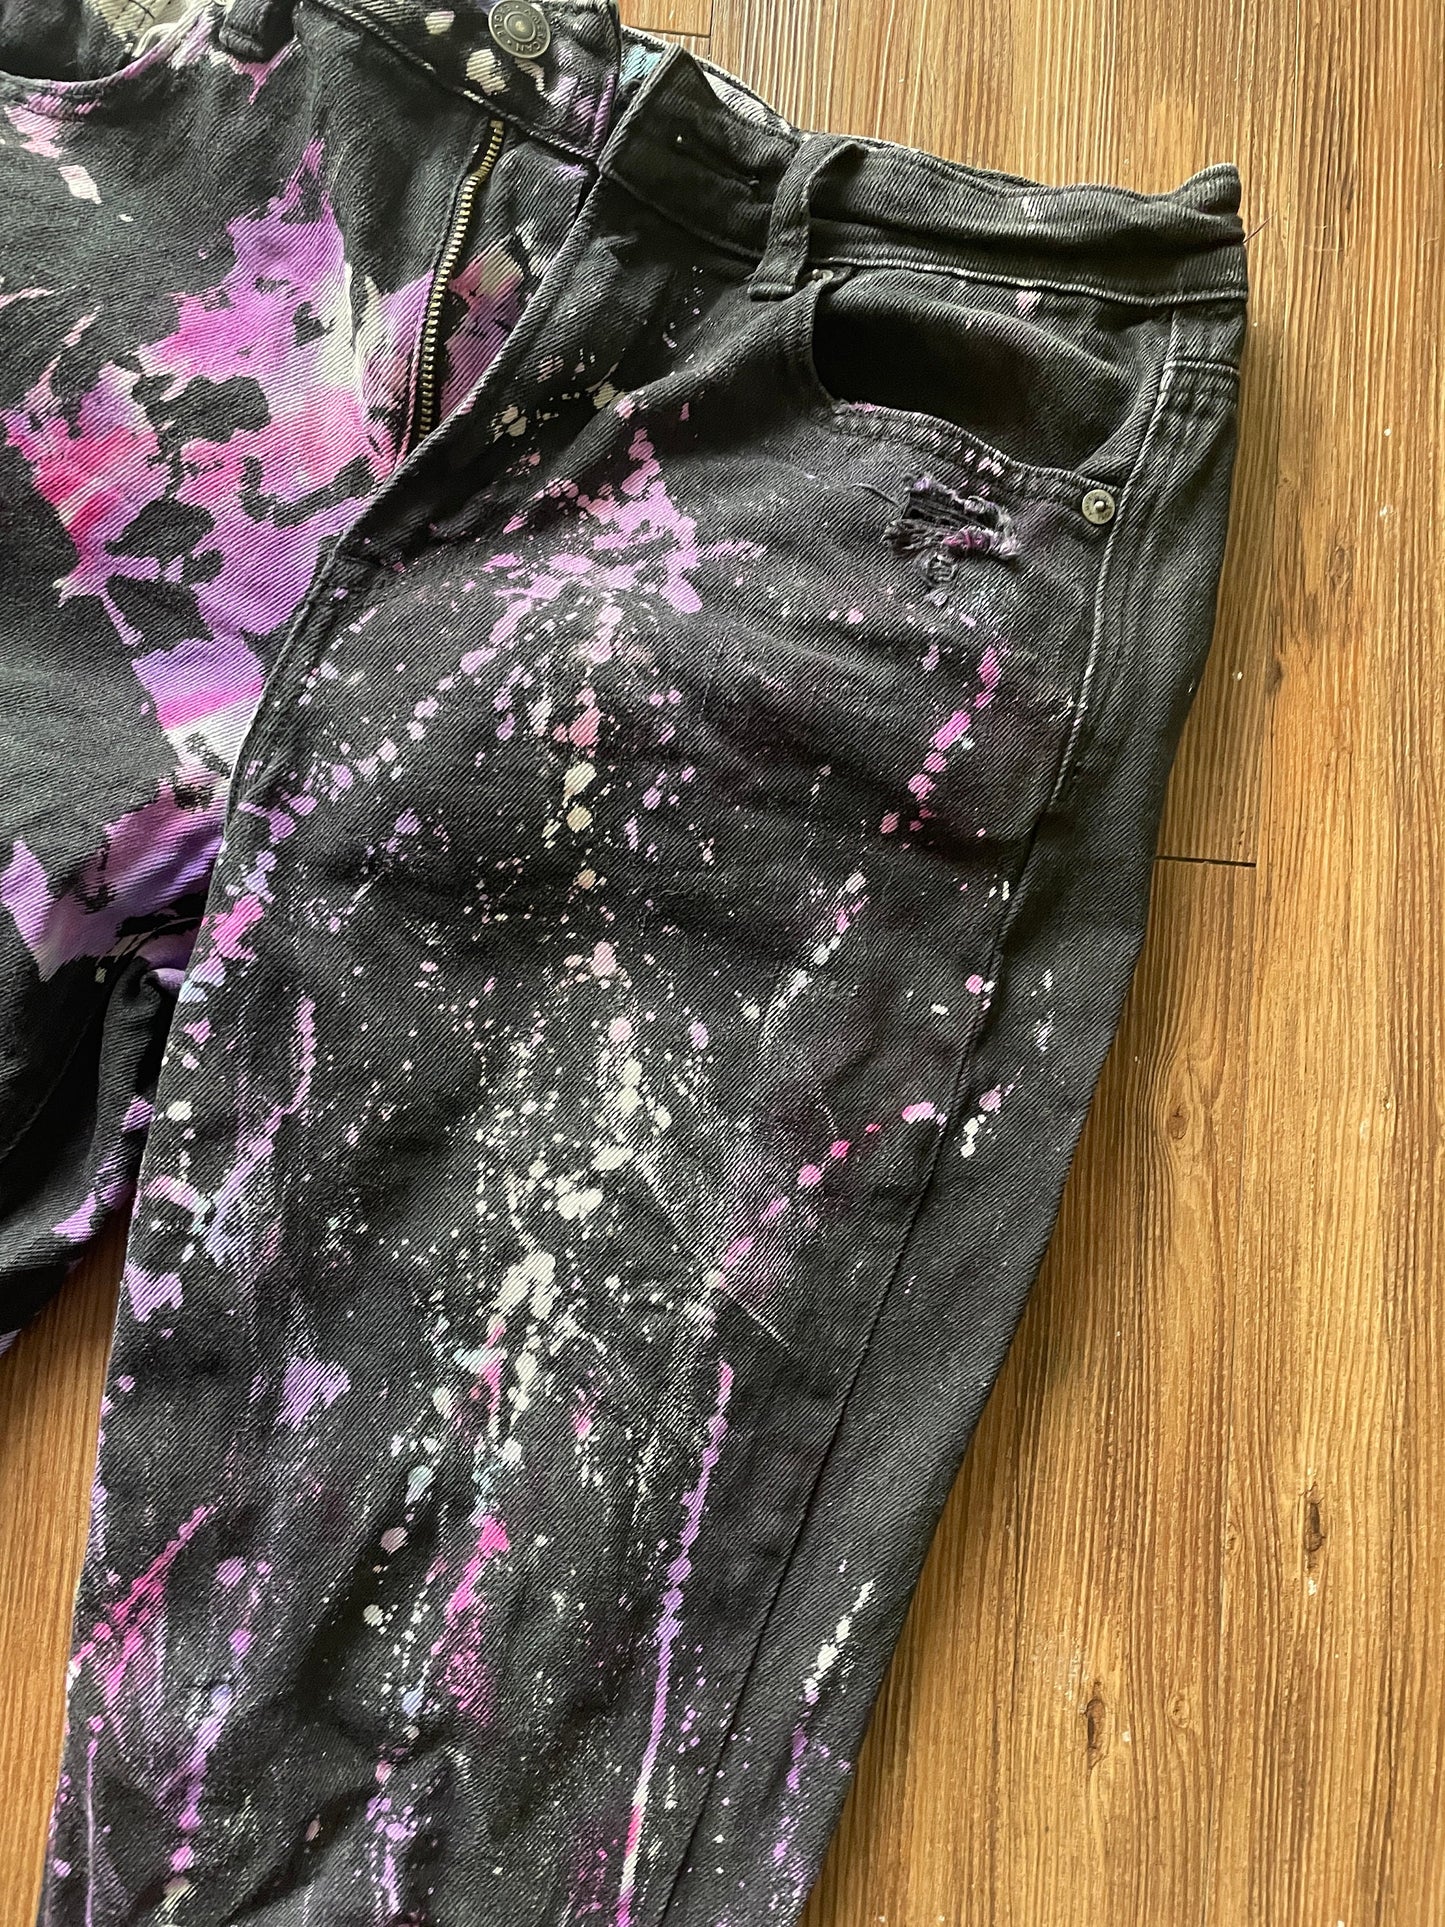 Black Bleach Dyed American Eagle Ripped Mom Jeans | Pink Purple Reverse Tie Dye Pants with Holes | Women's Size 4 | Handmade & Thrifted